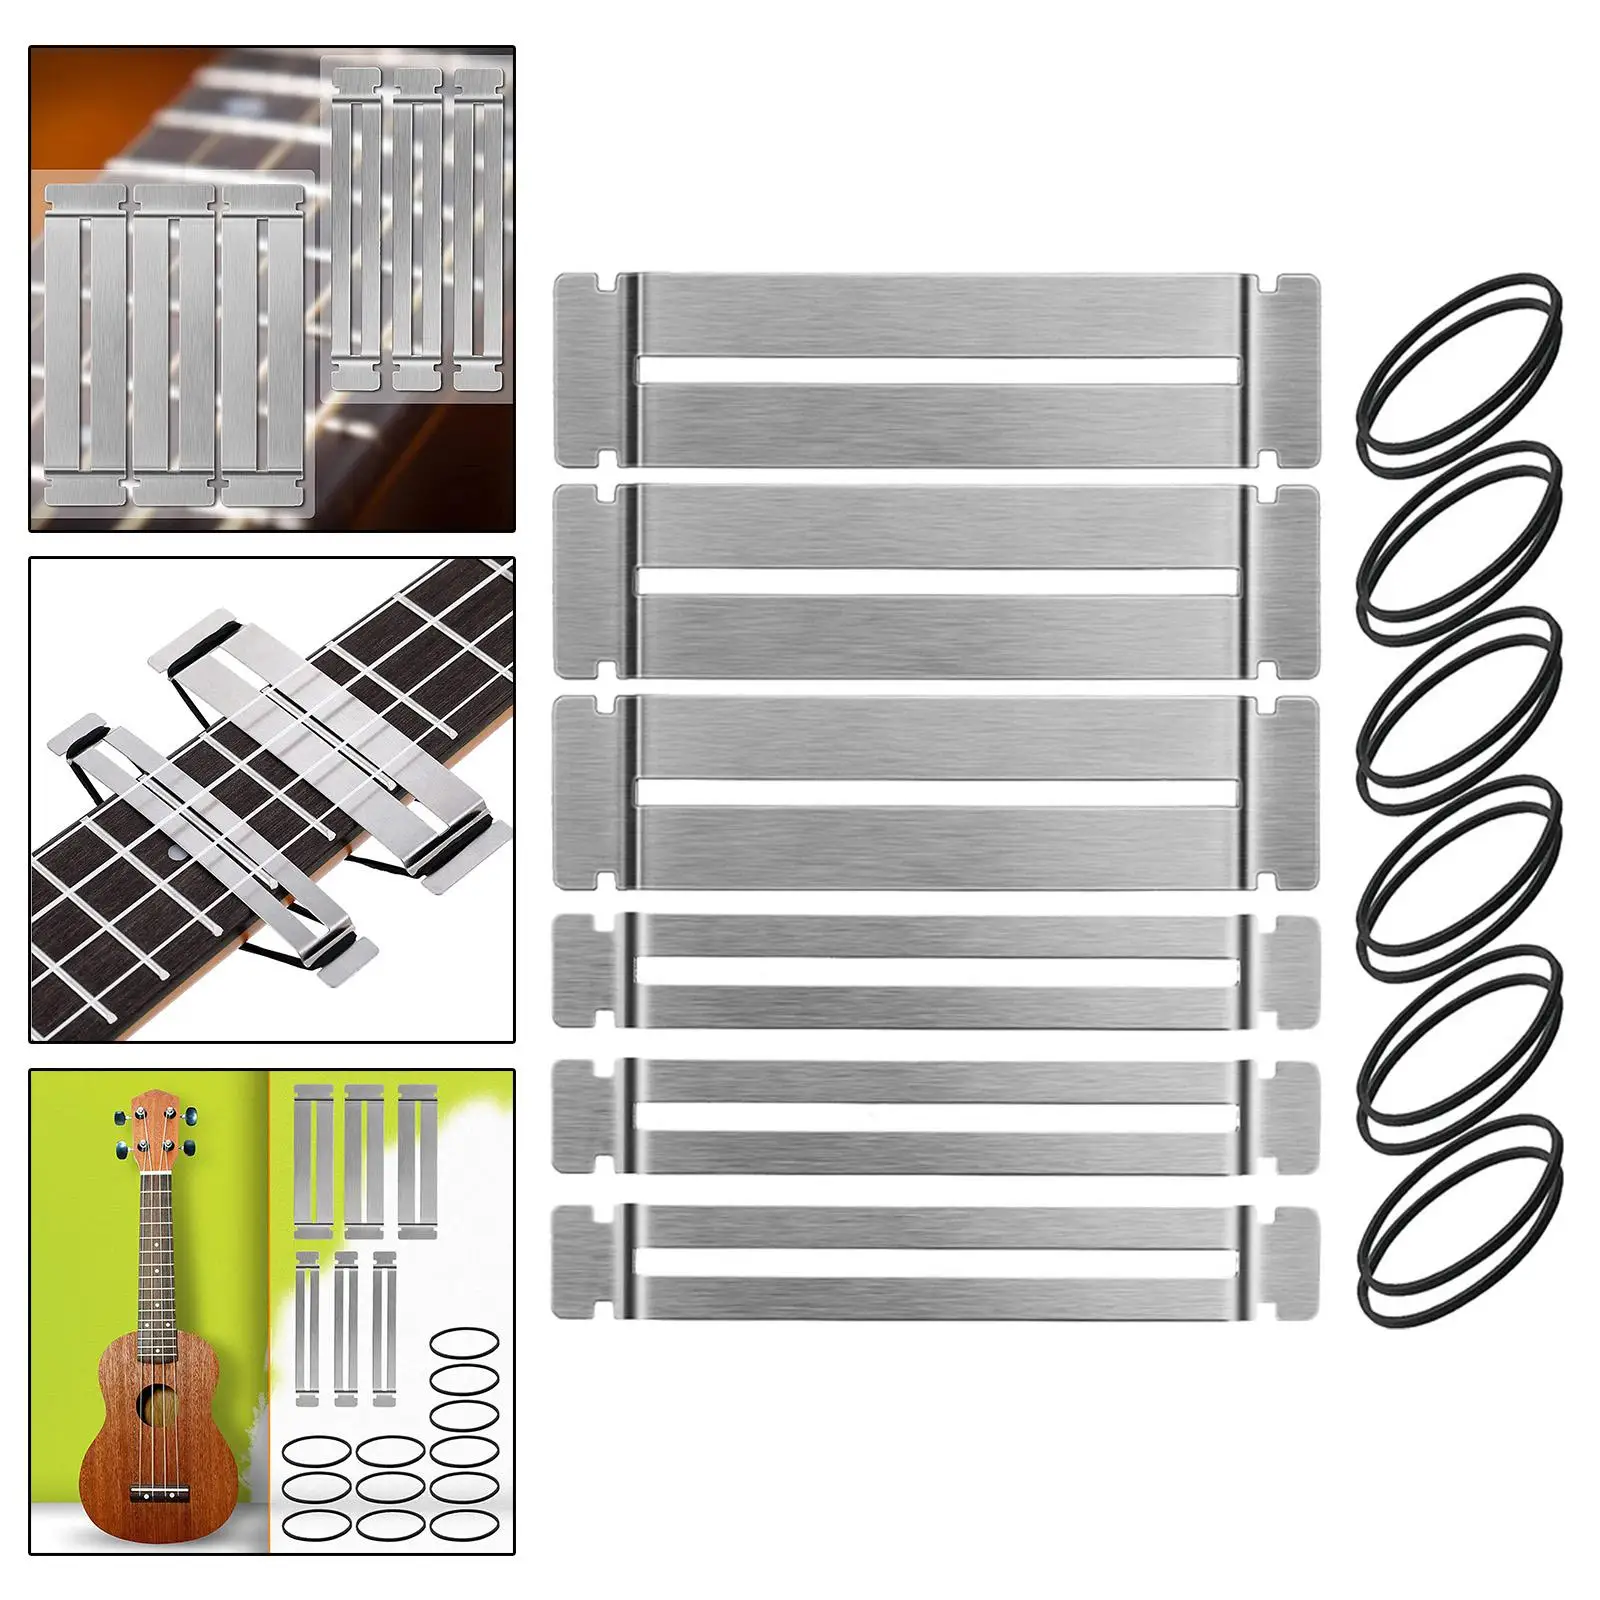 Stainless Steel Guitar Fret Repair Tool Kit for   and Polishing Frets